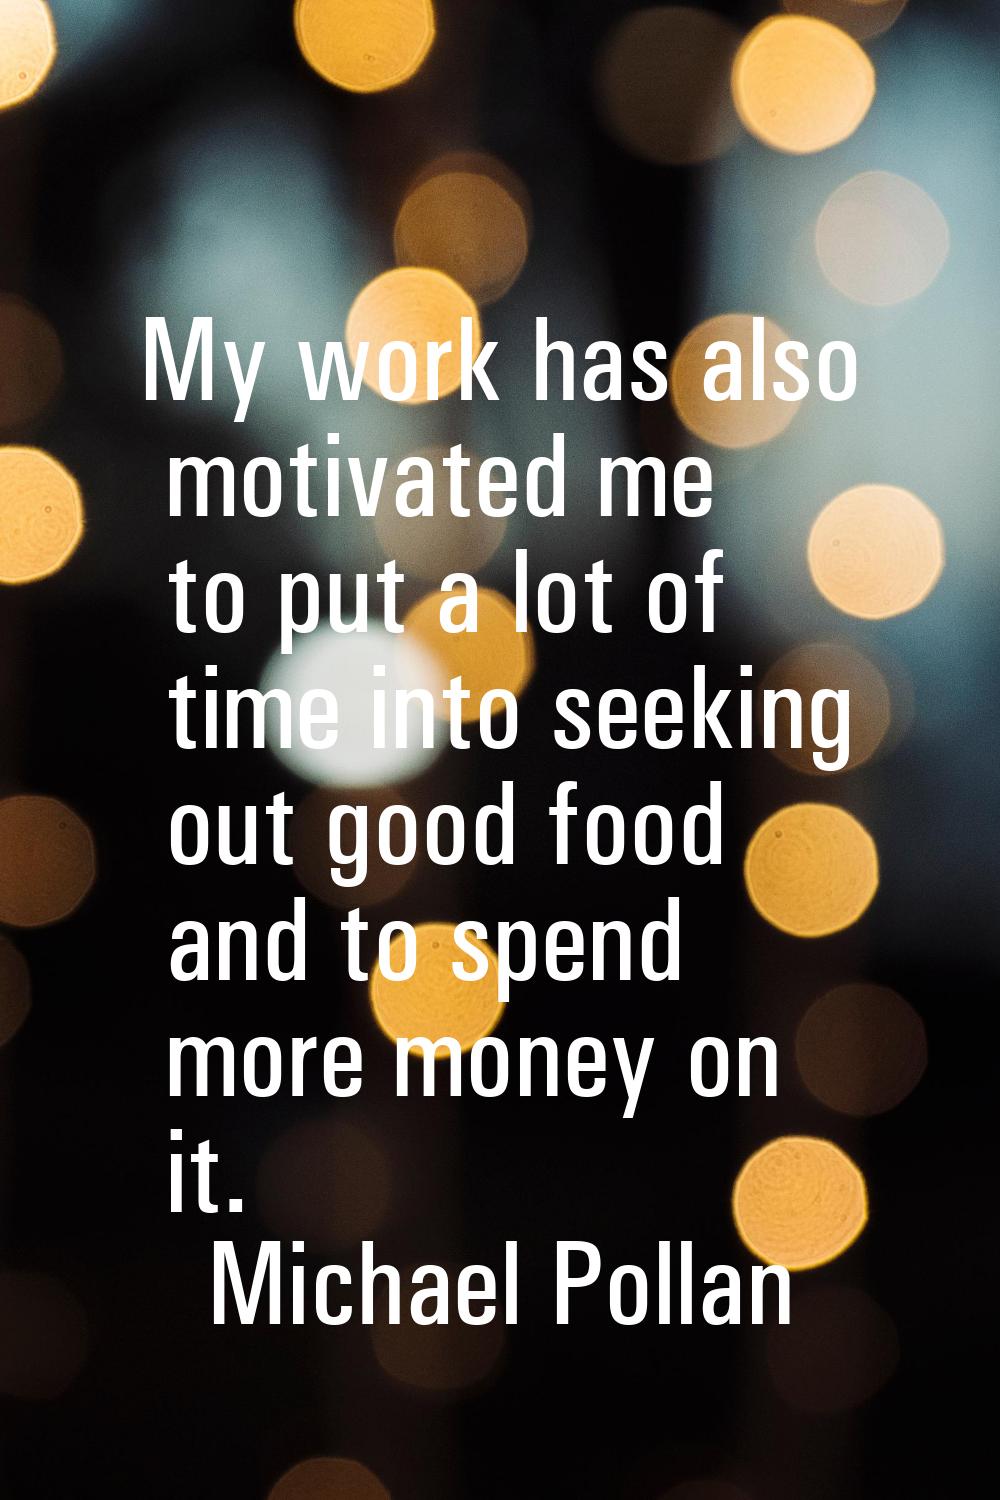 My work has also motivated me to put a lot of time into seeking out good food and to spend more mon